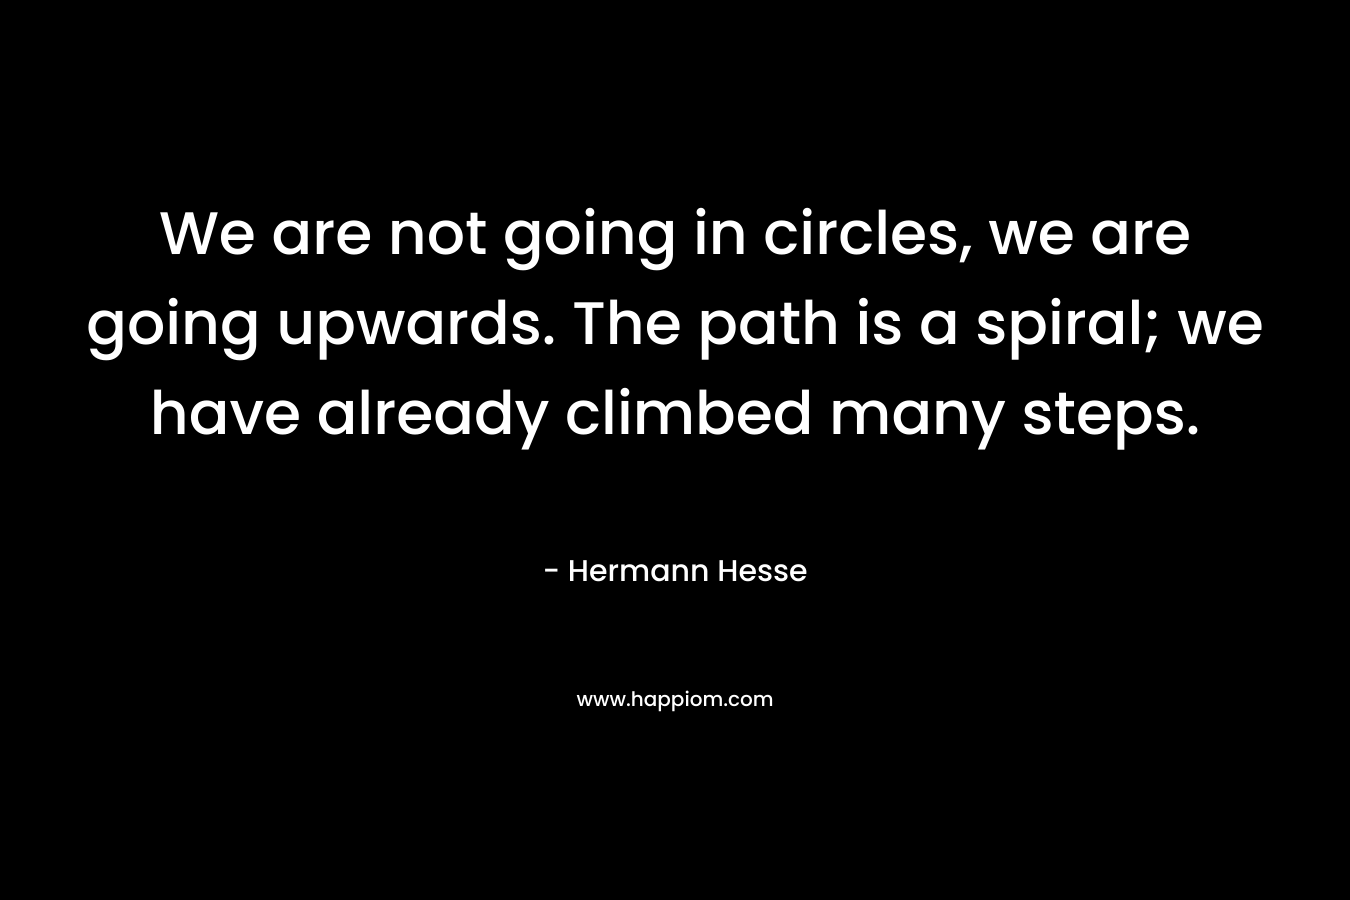 We are not going in circles, we are going upwards. The path is a spiral; we have already climbed many steps. – Hermann Hesse